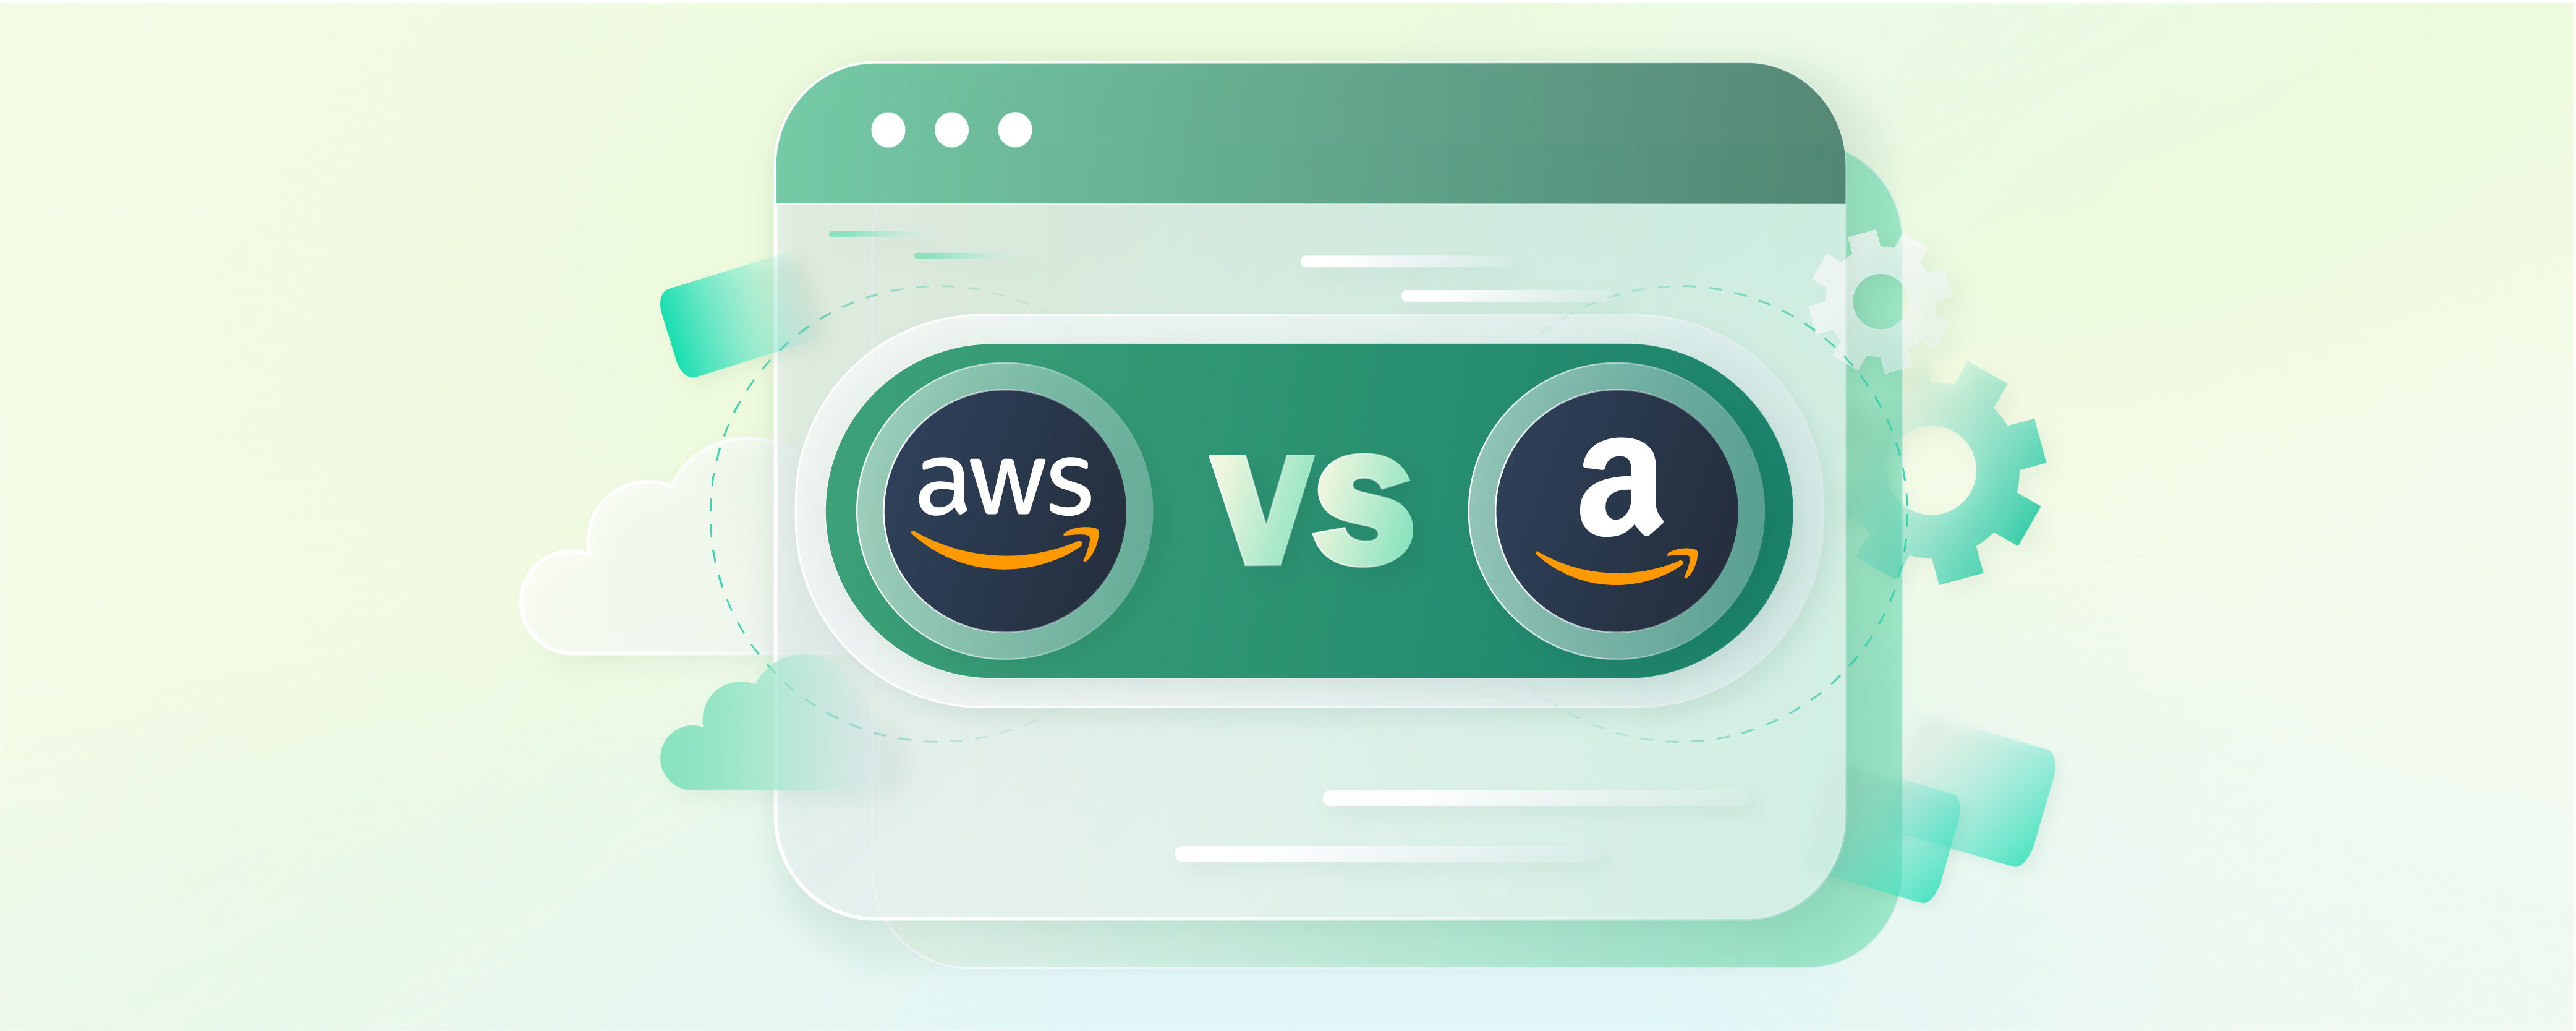 Amazon Web Services vs Amazon Ecosystem: Differences and Similarities